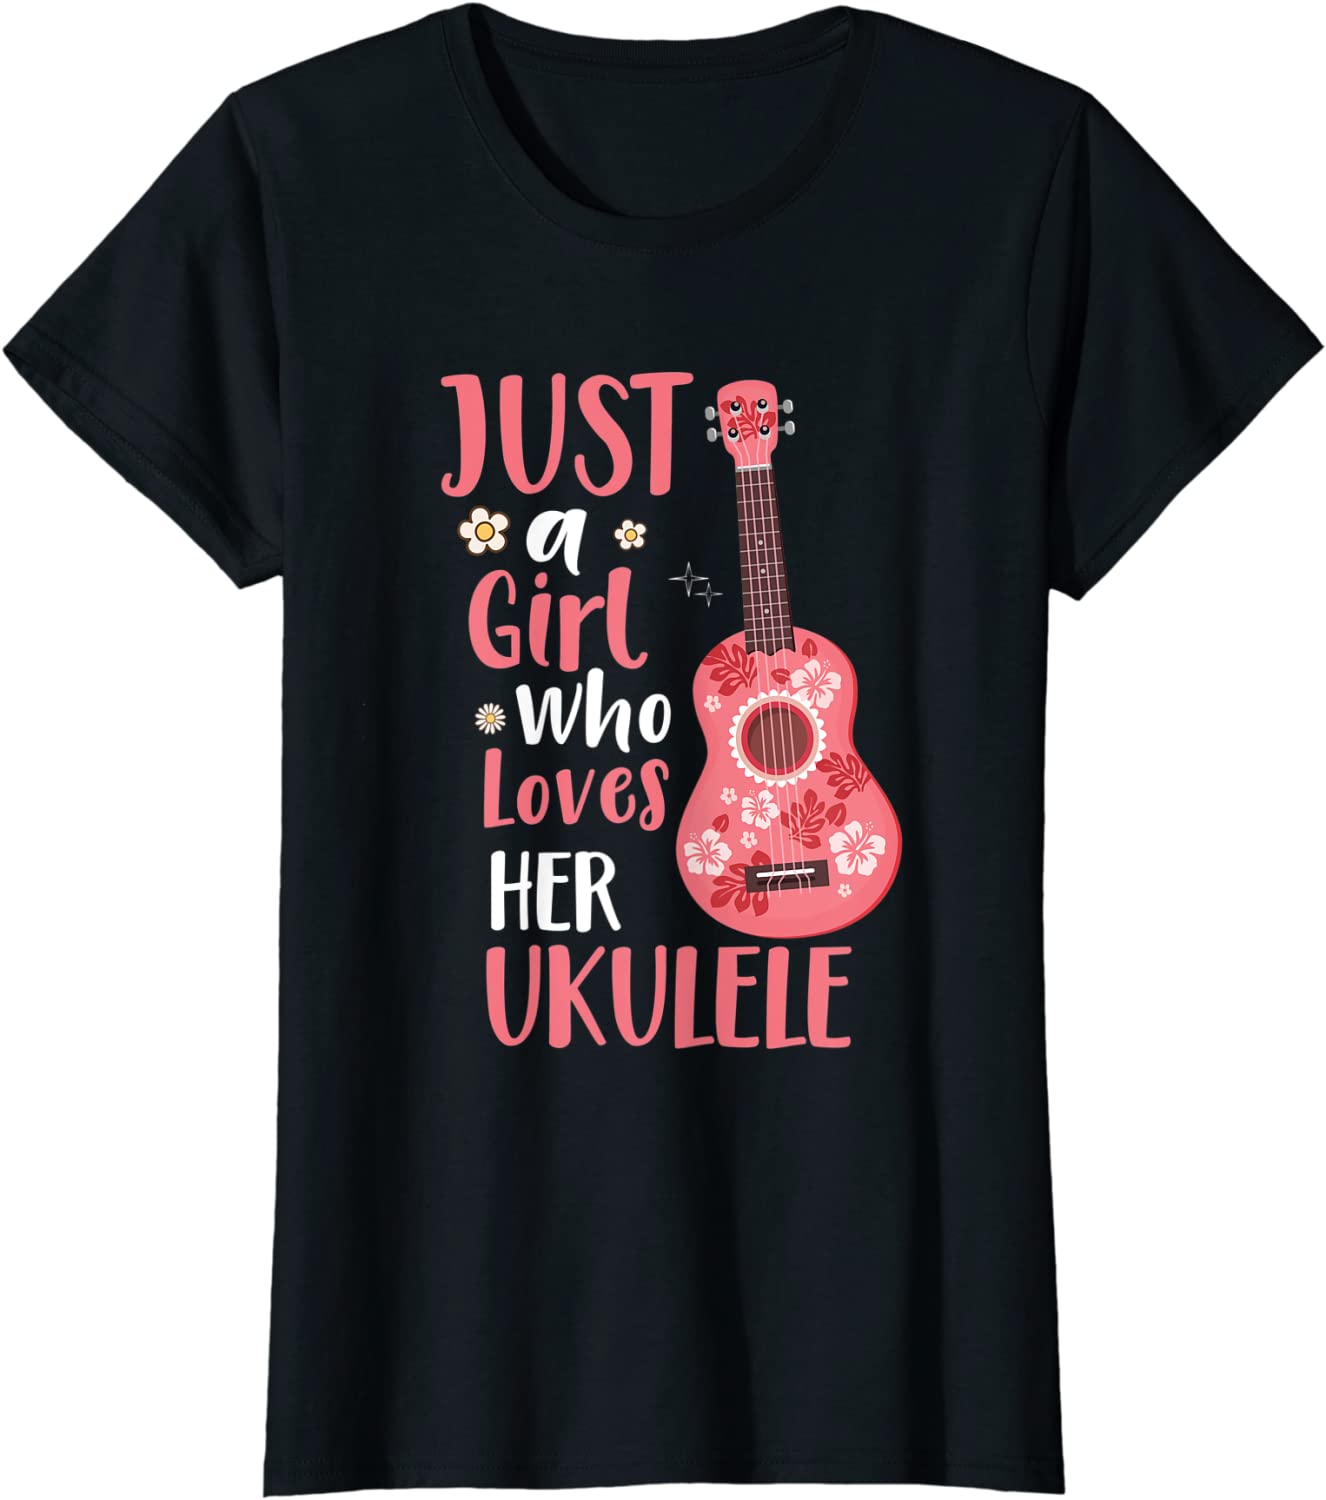 Womens Just A Girl Who Loves Her UKULELE Clothes Outfit tee T-Shirt Best Price